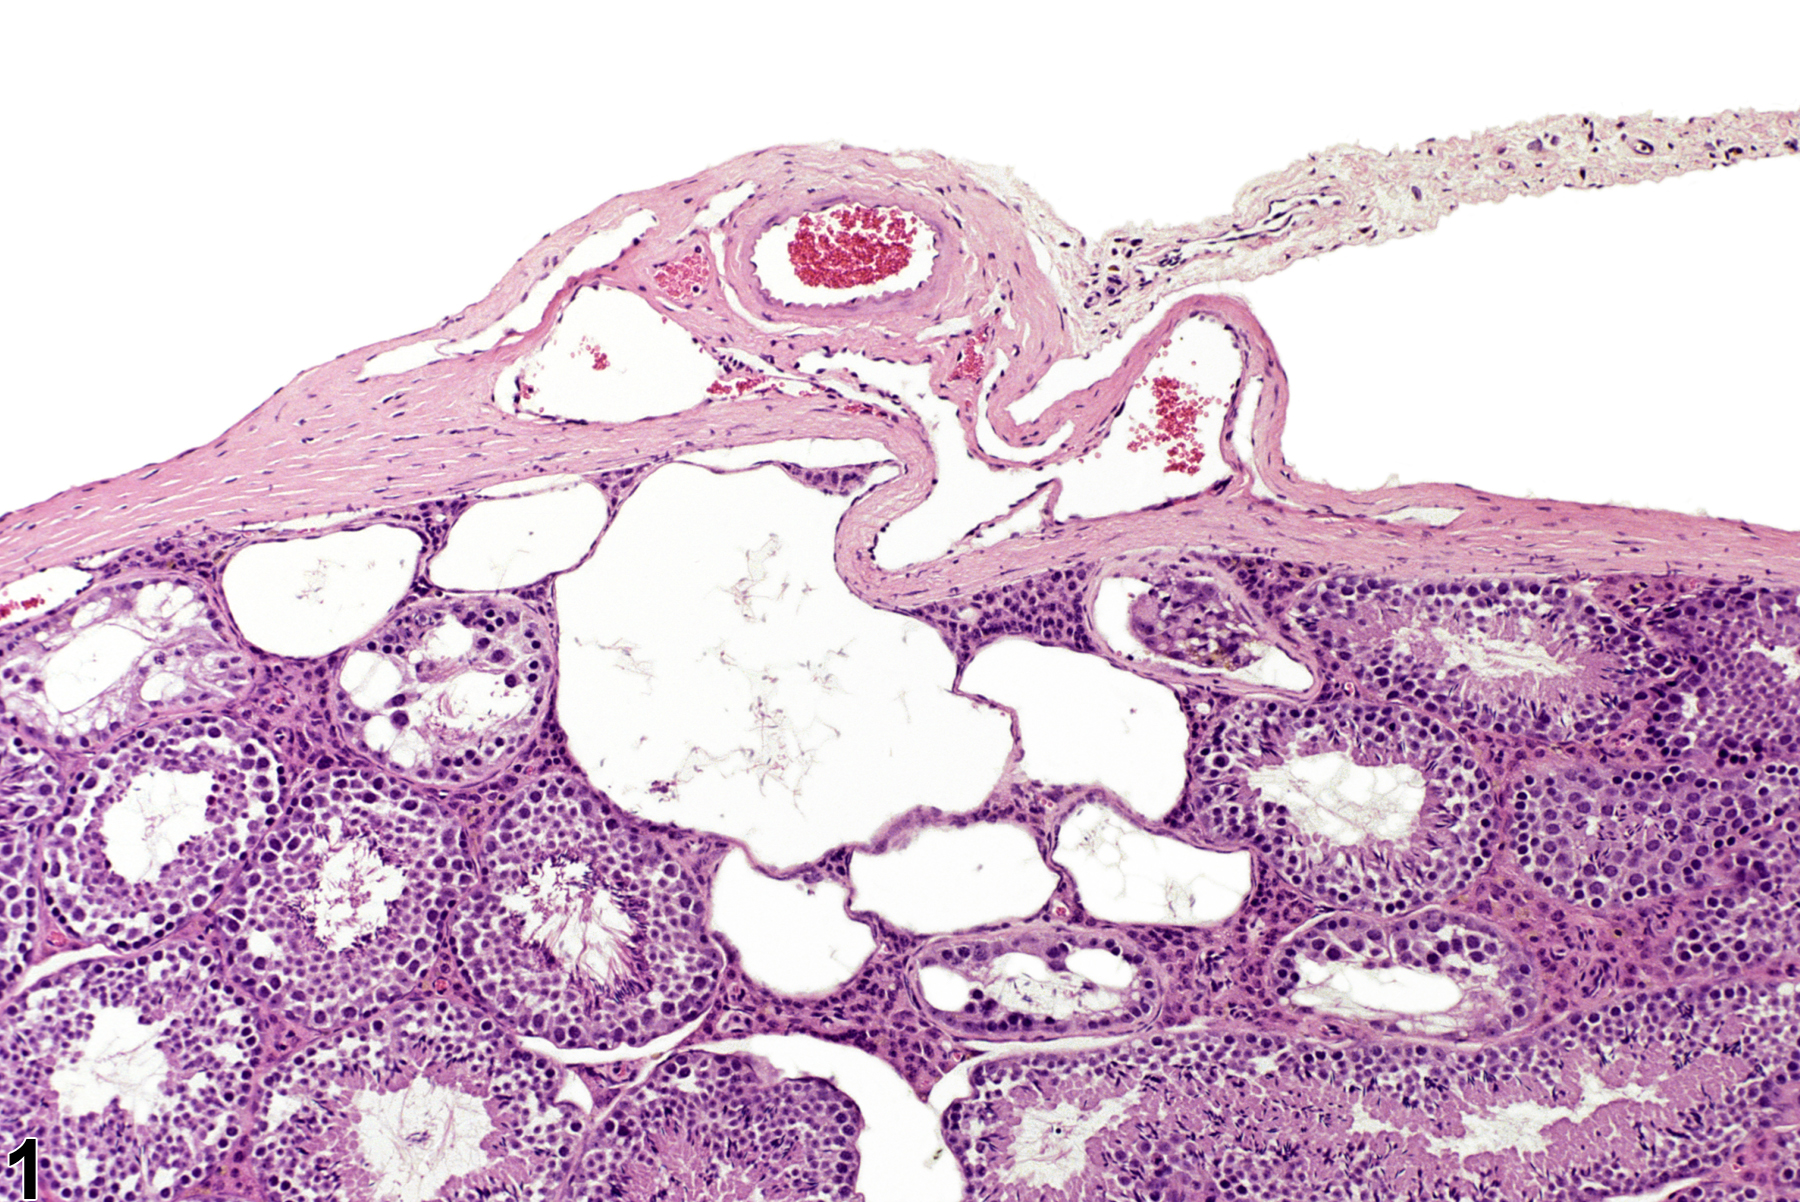 Image of rete testis dilation in the testis from a male B6C3F1 mouse in a chronic study